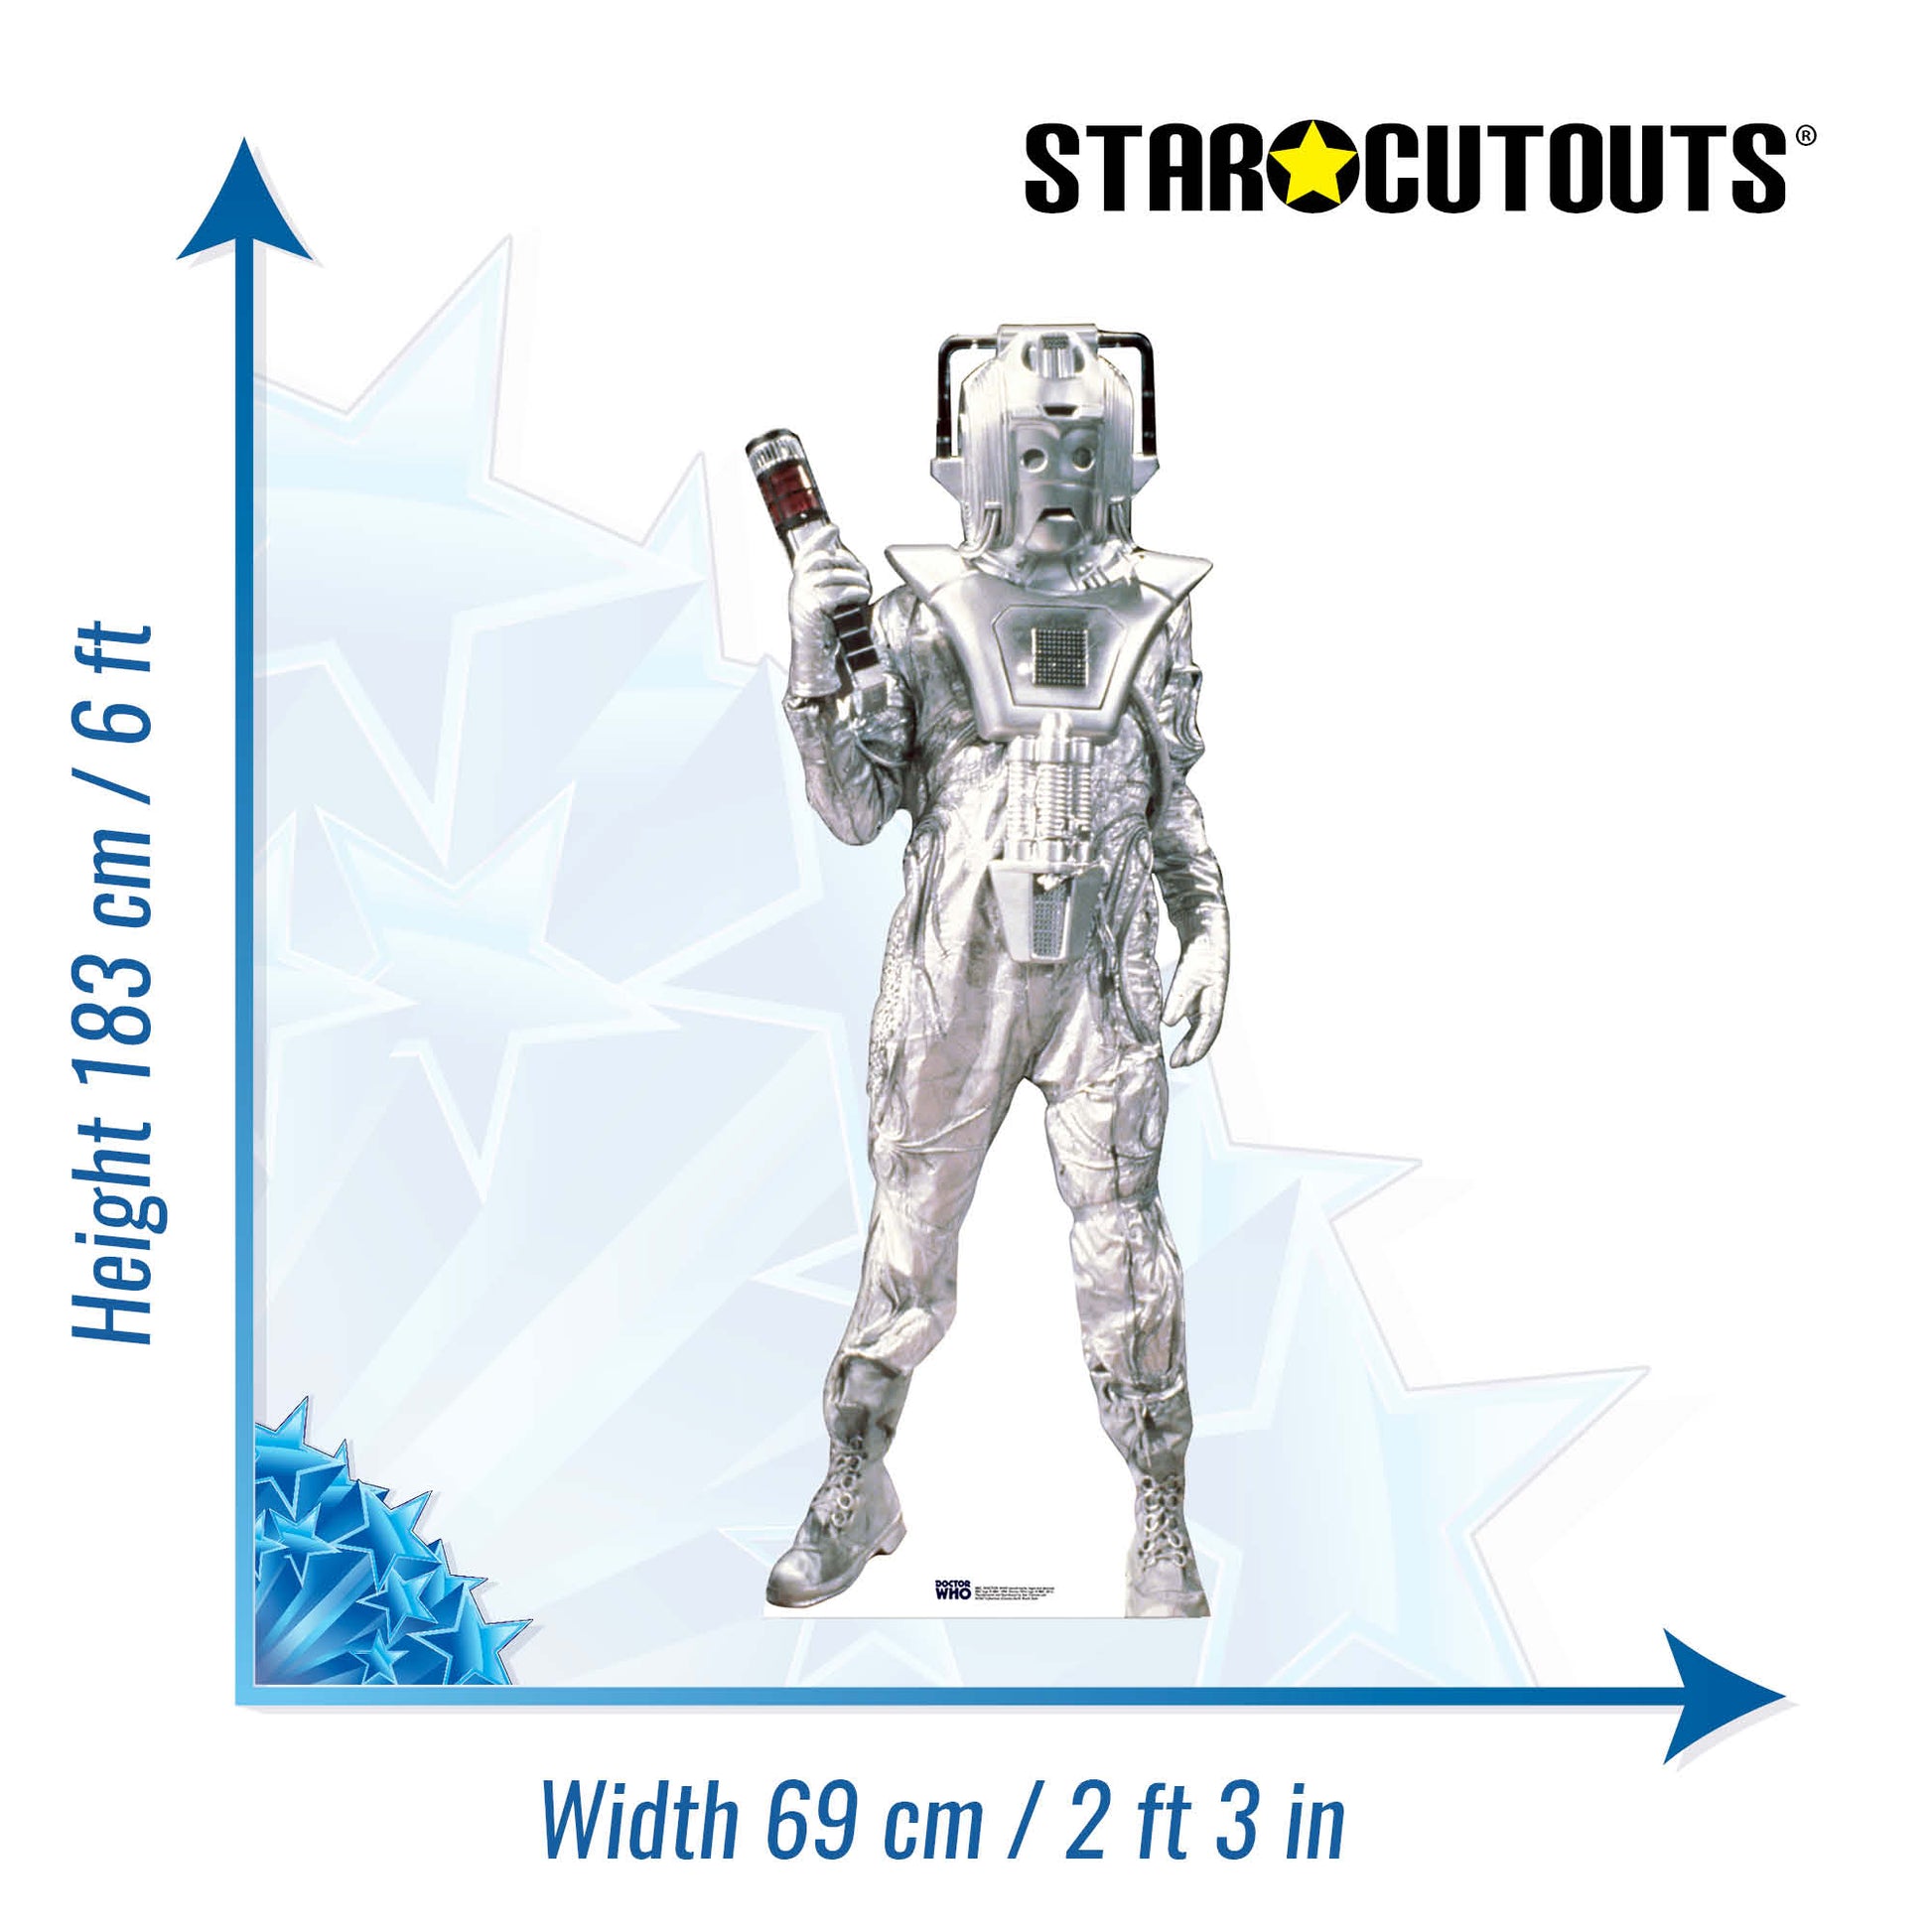 Classic Cyberman Earth Shock Style Cardboard Cut Out Height 183 cmcm - Star Cutouts